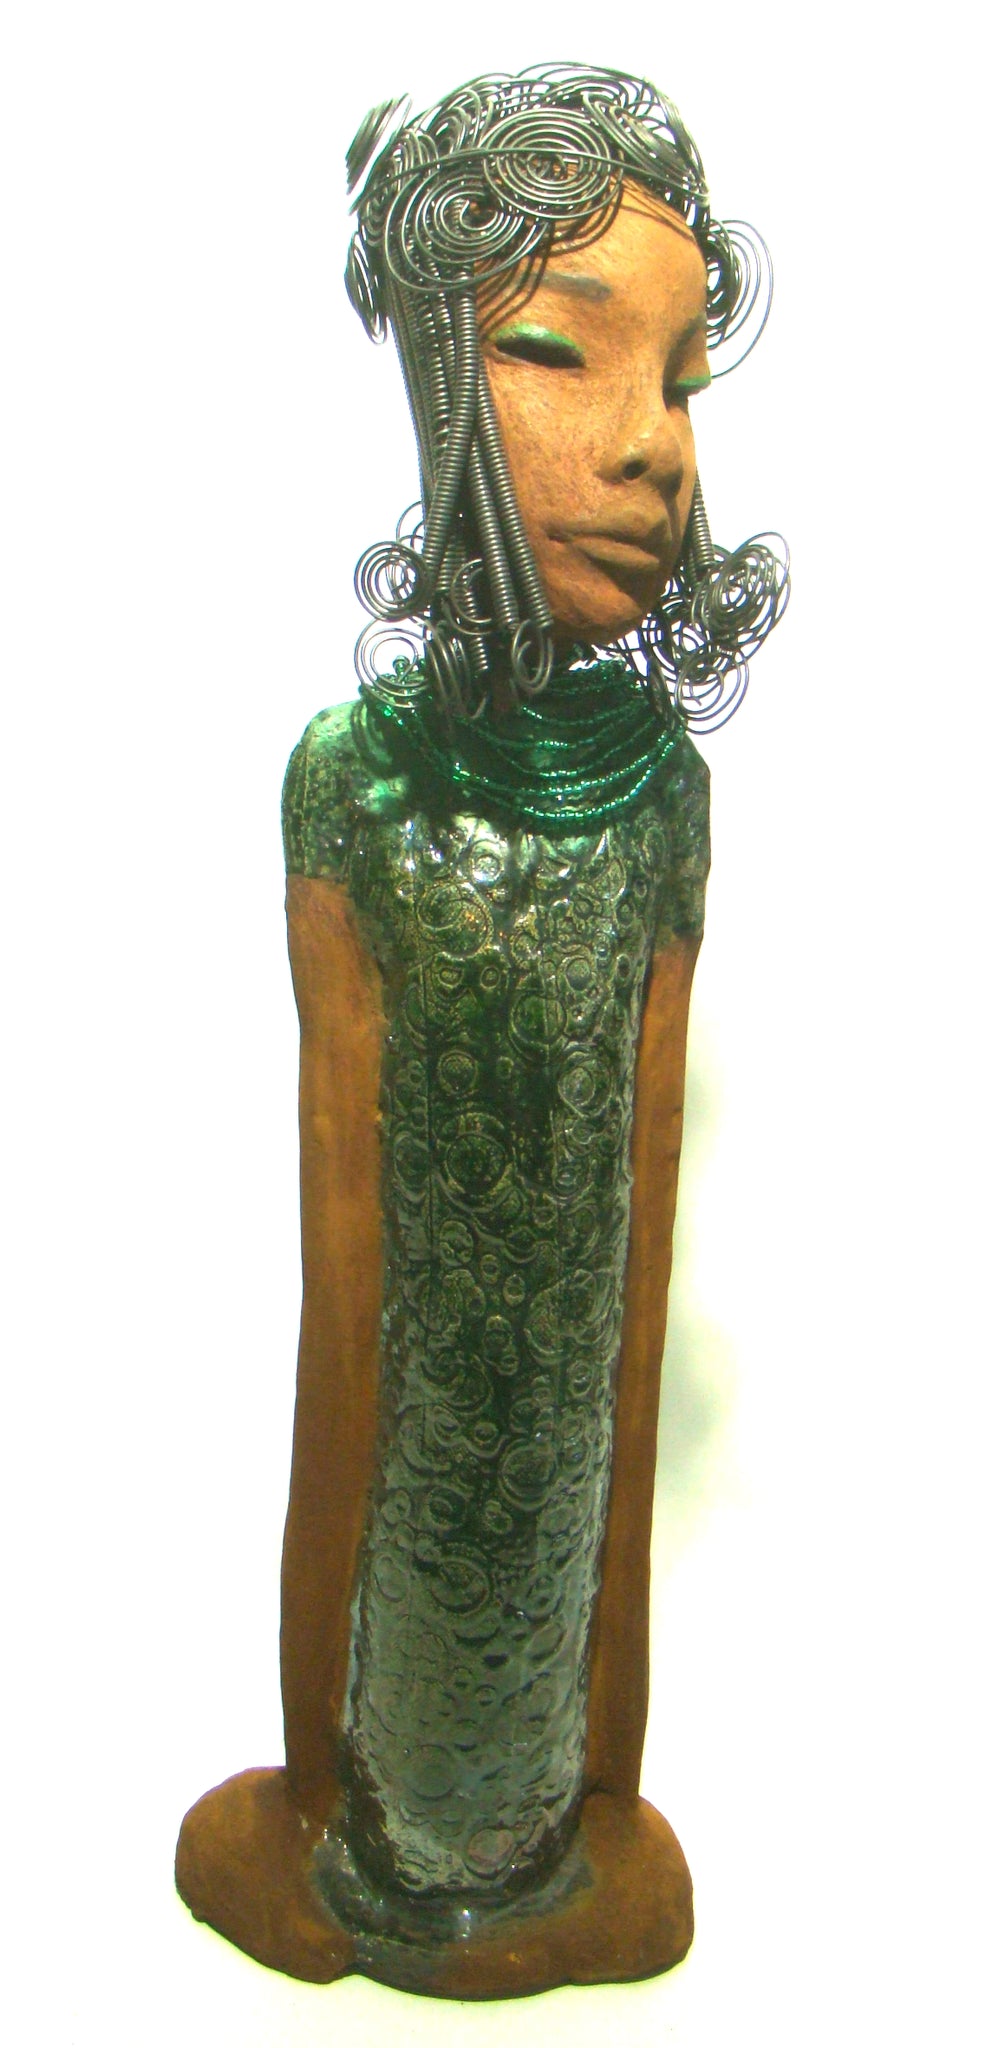 Felicia stands 25" x 8" x 6". and weighs 8.14 Lbs. She has a honey brown complexion with with over 40 feet of fancy wire hair. Felicia dress is textured alligator green. She wears emerald green bead. She really does have a sweet face.